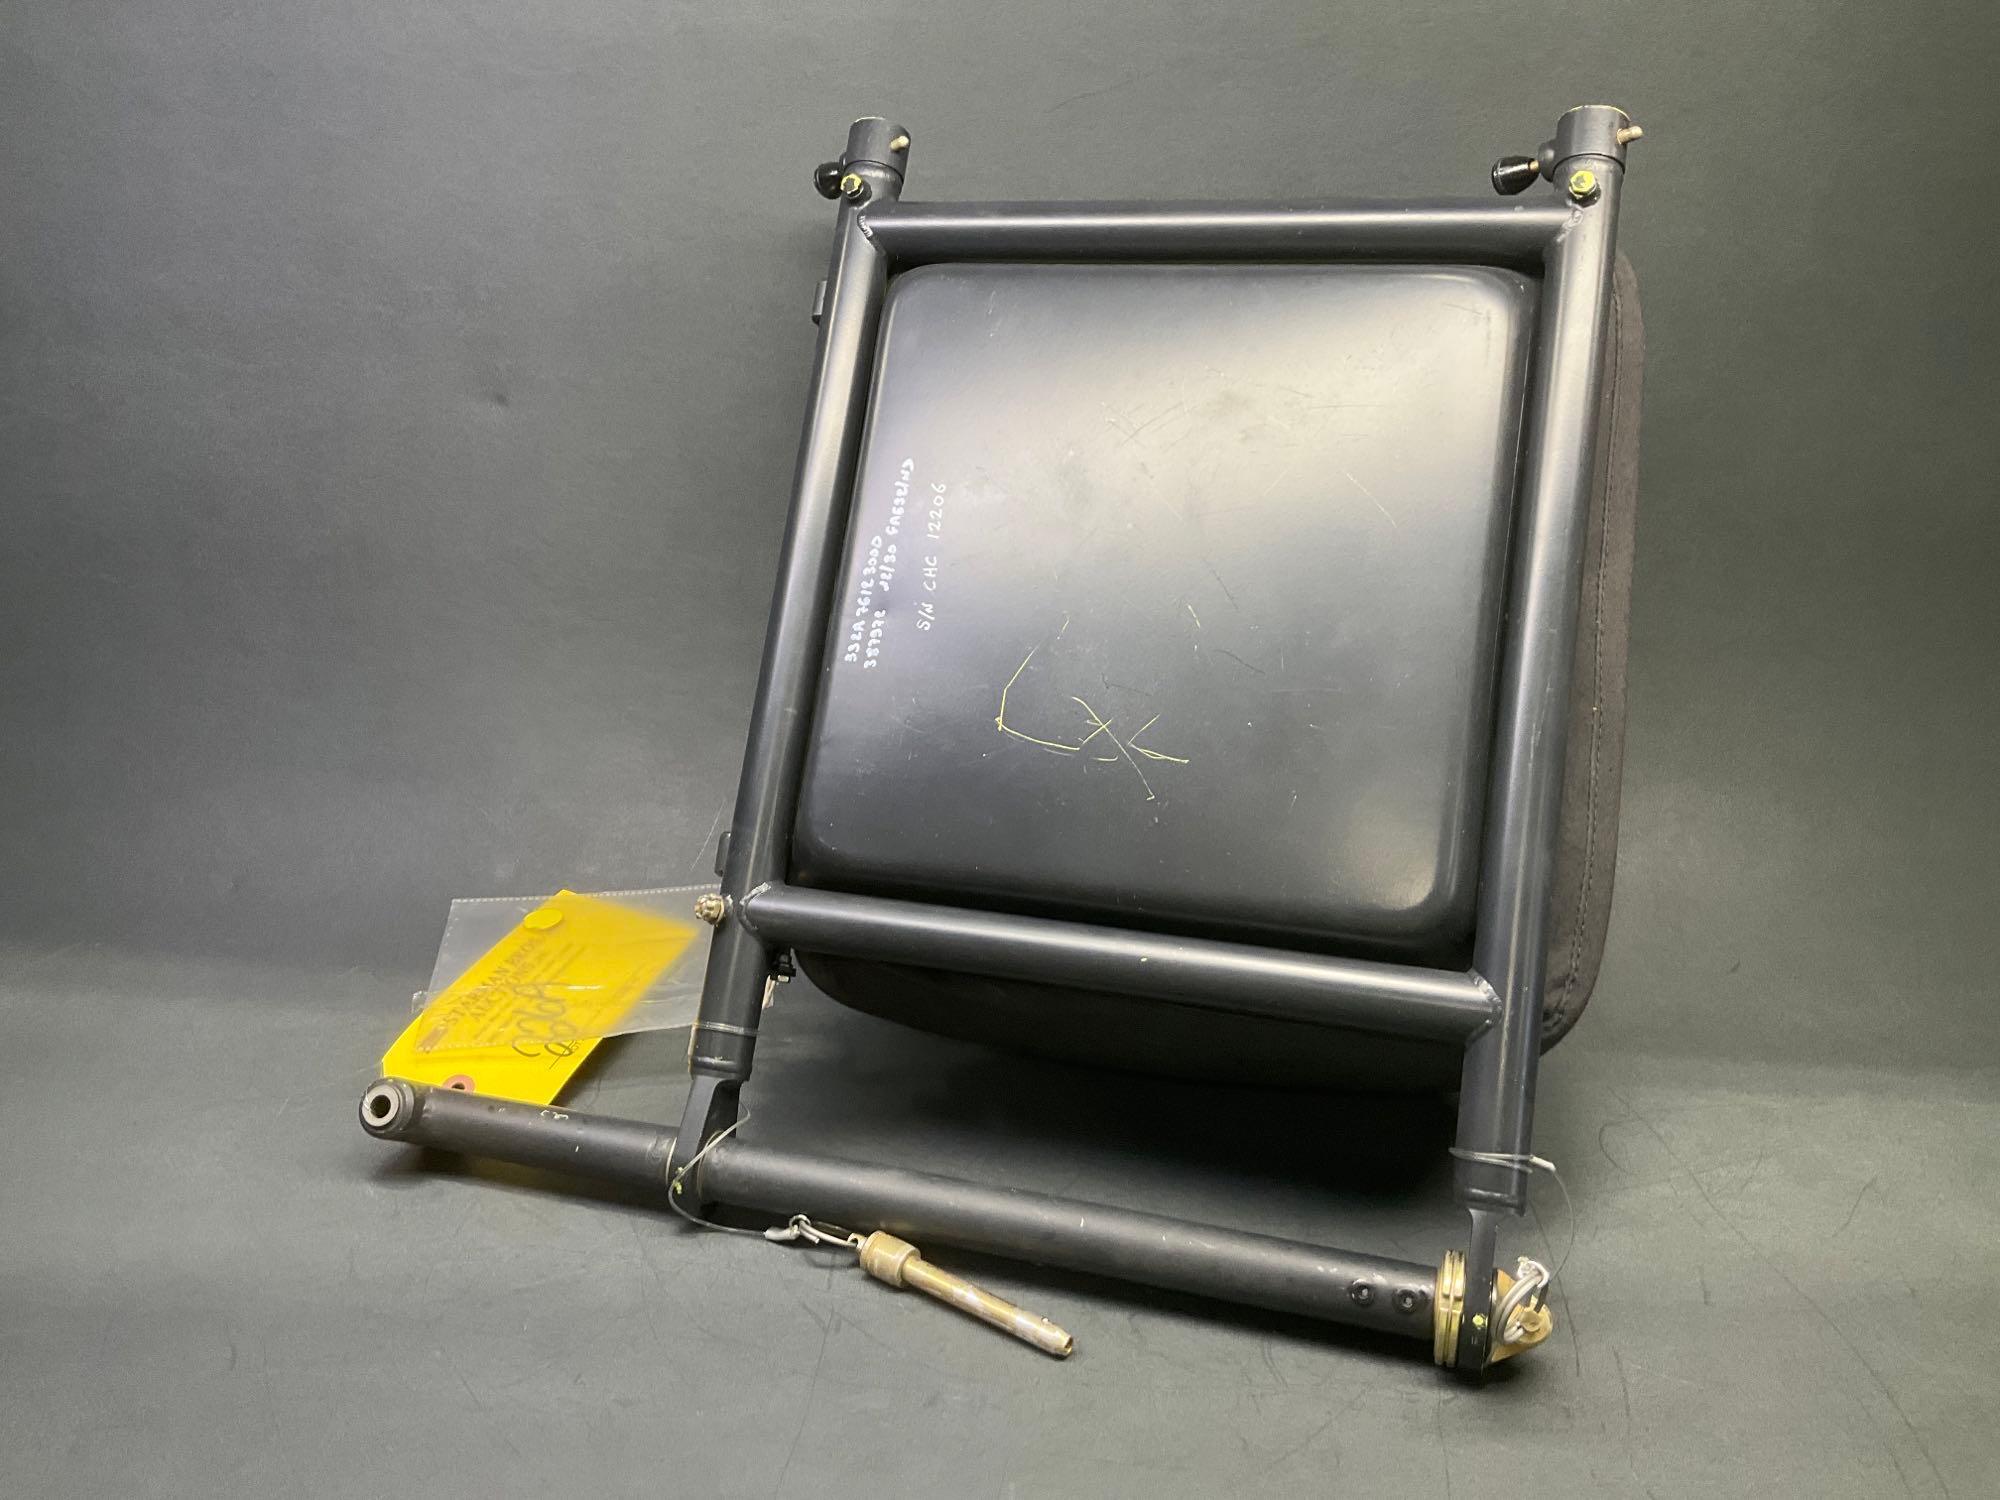 NEW CREW JUMP SEAT 332A76-1230-00